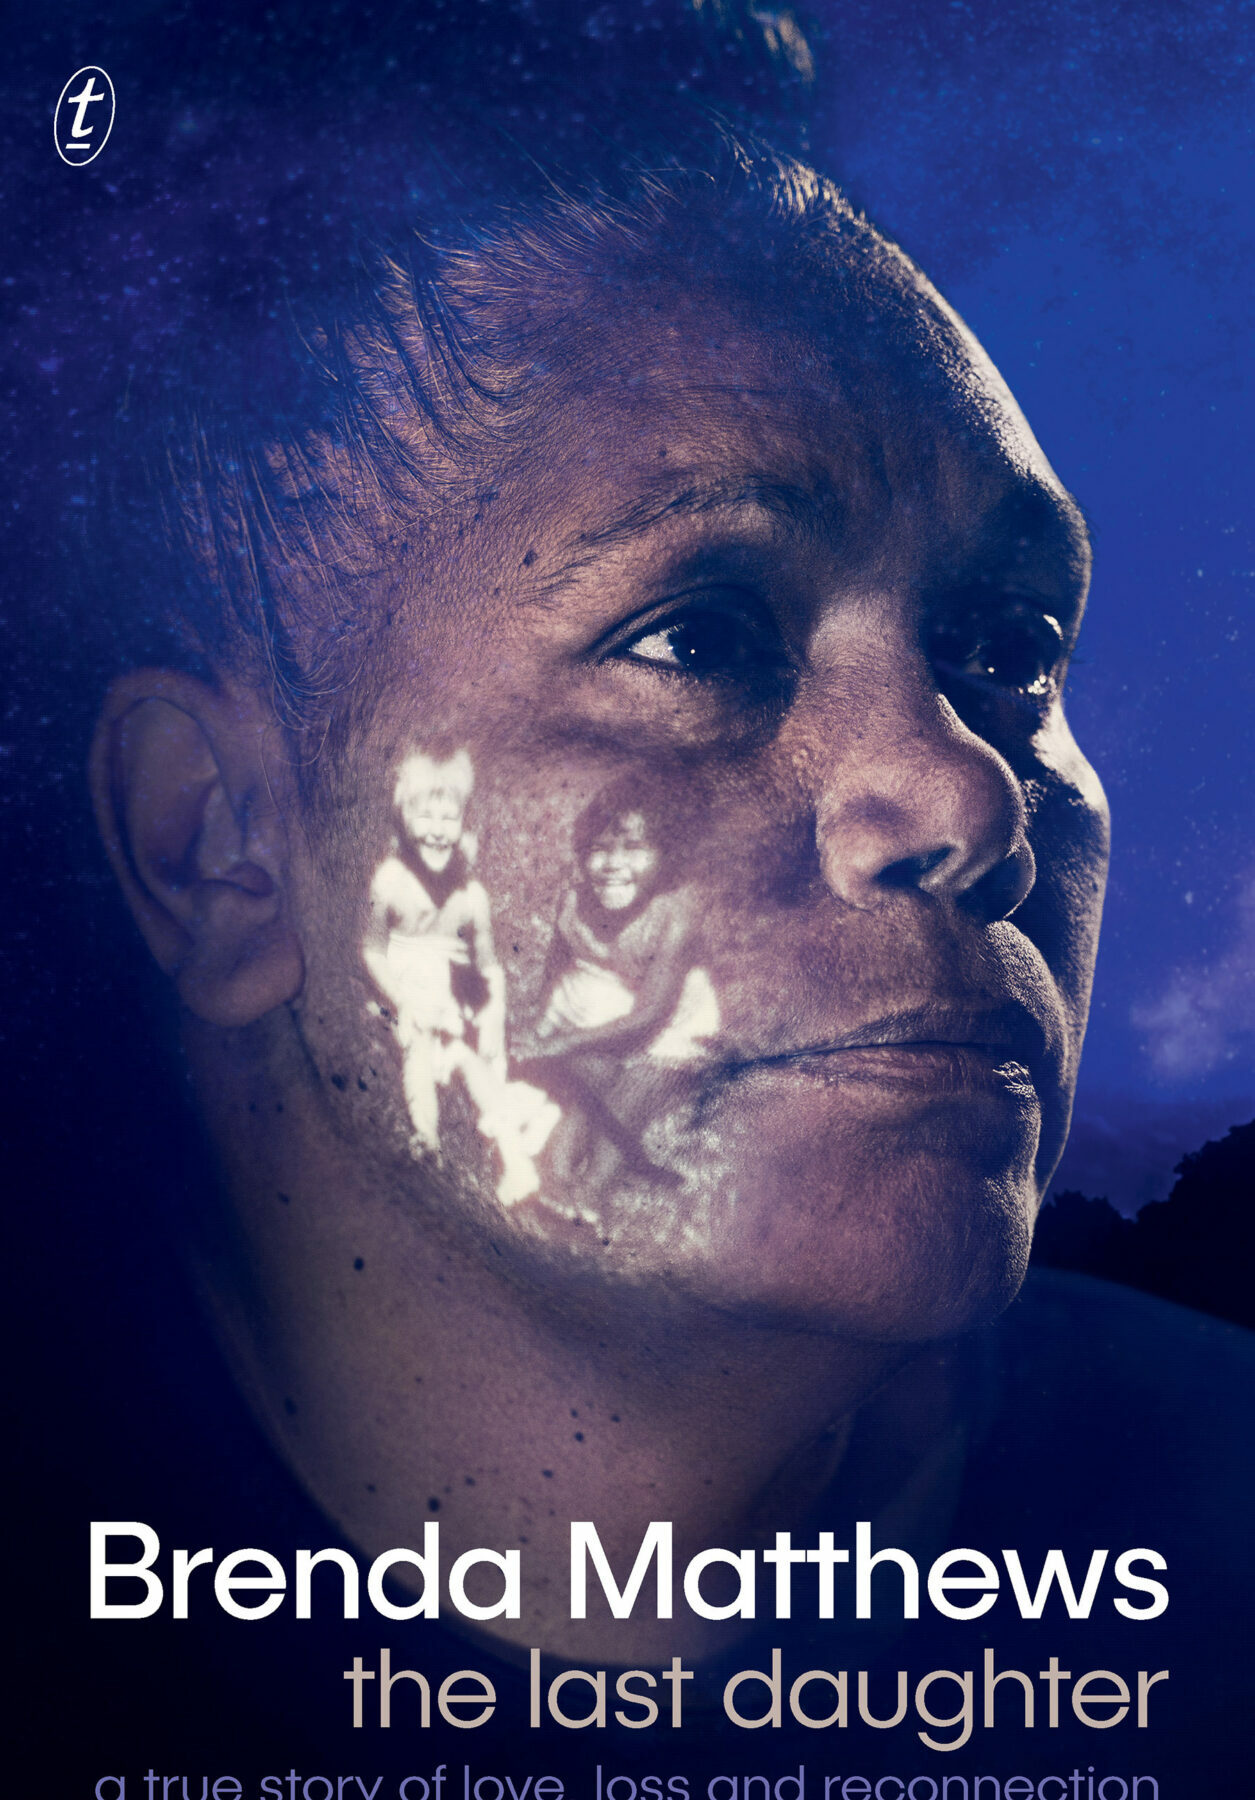 A book cover featuring a photograph of an older Aboriginal woman with a second photograph of two children imposed on her cheek